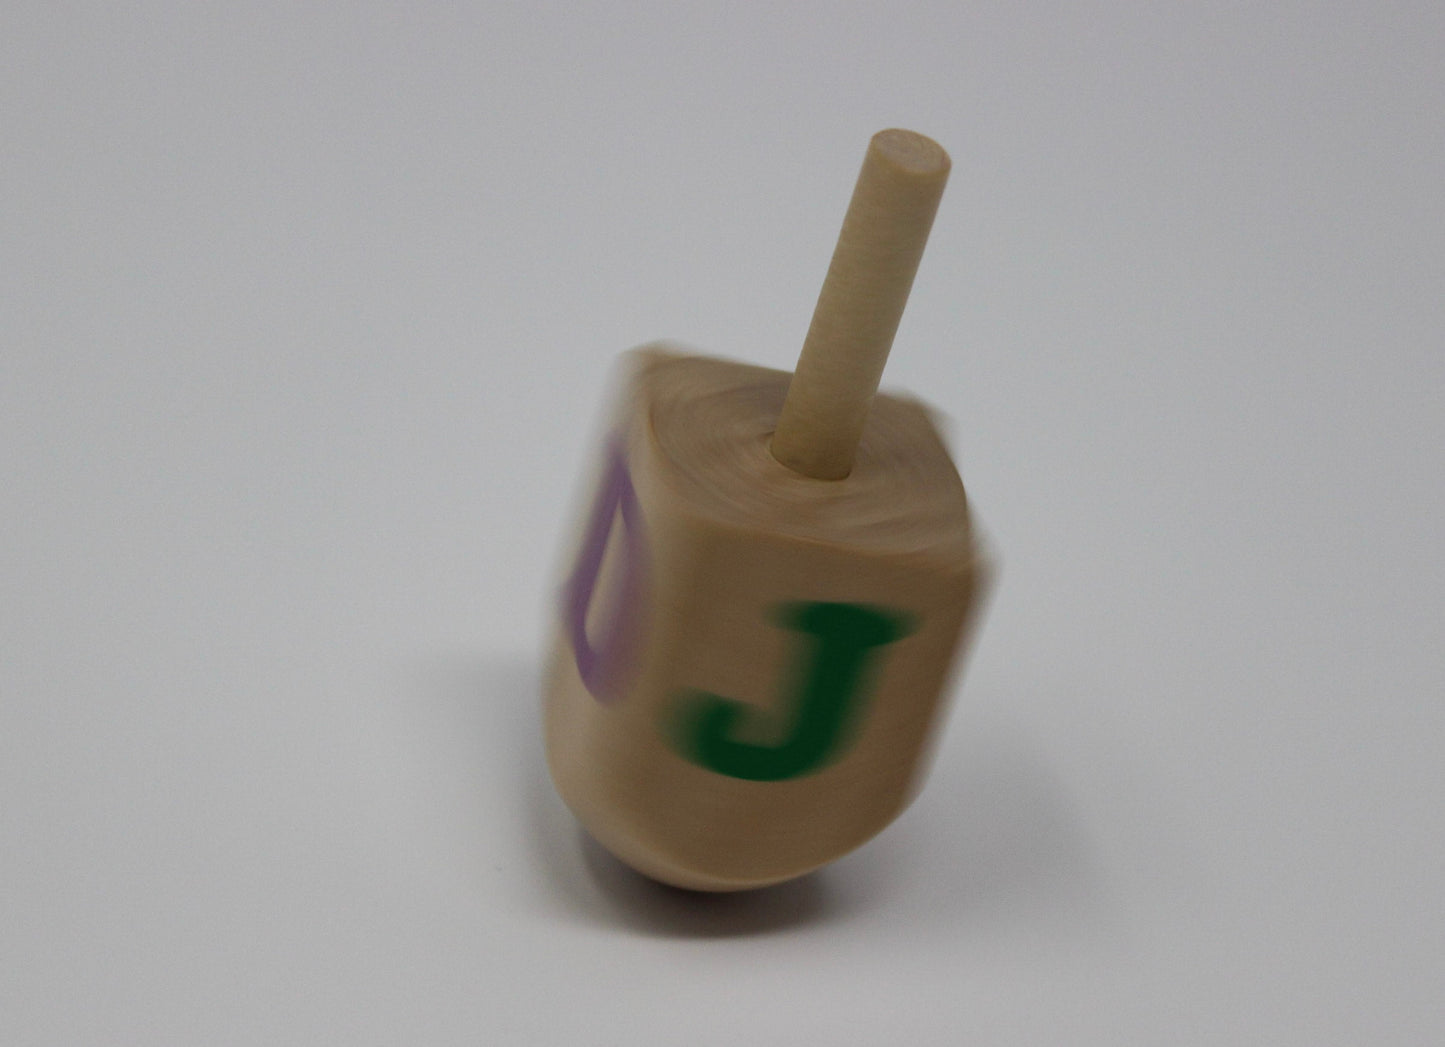 The Dreidel Hypothesis: A Many-Sided Journey